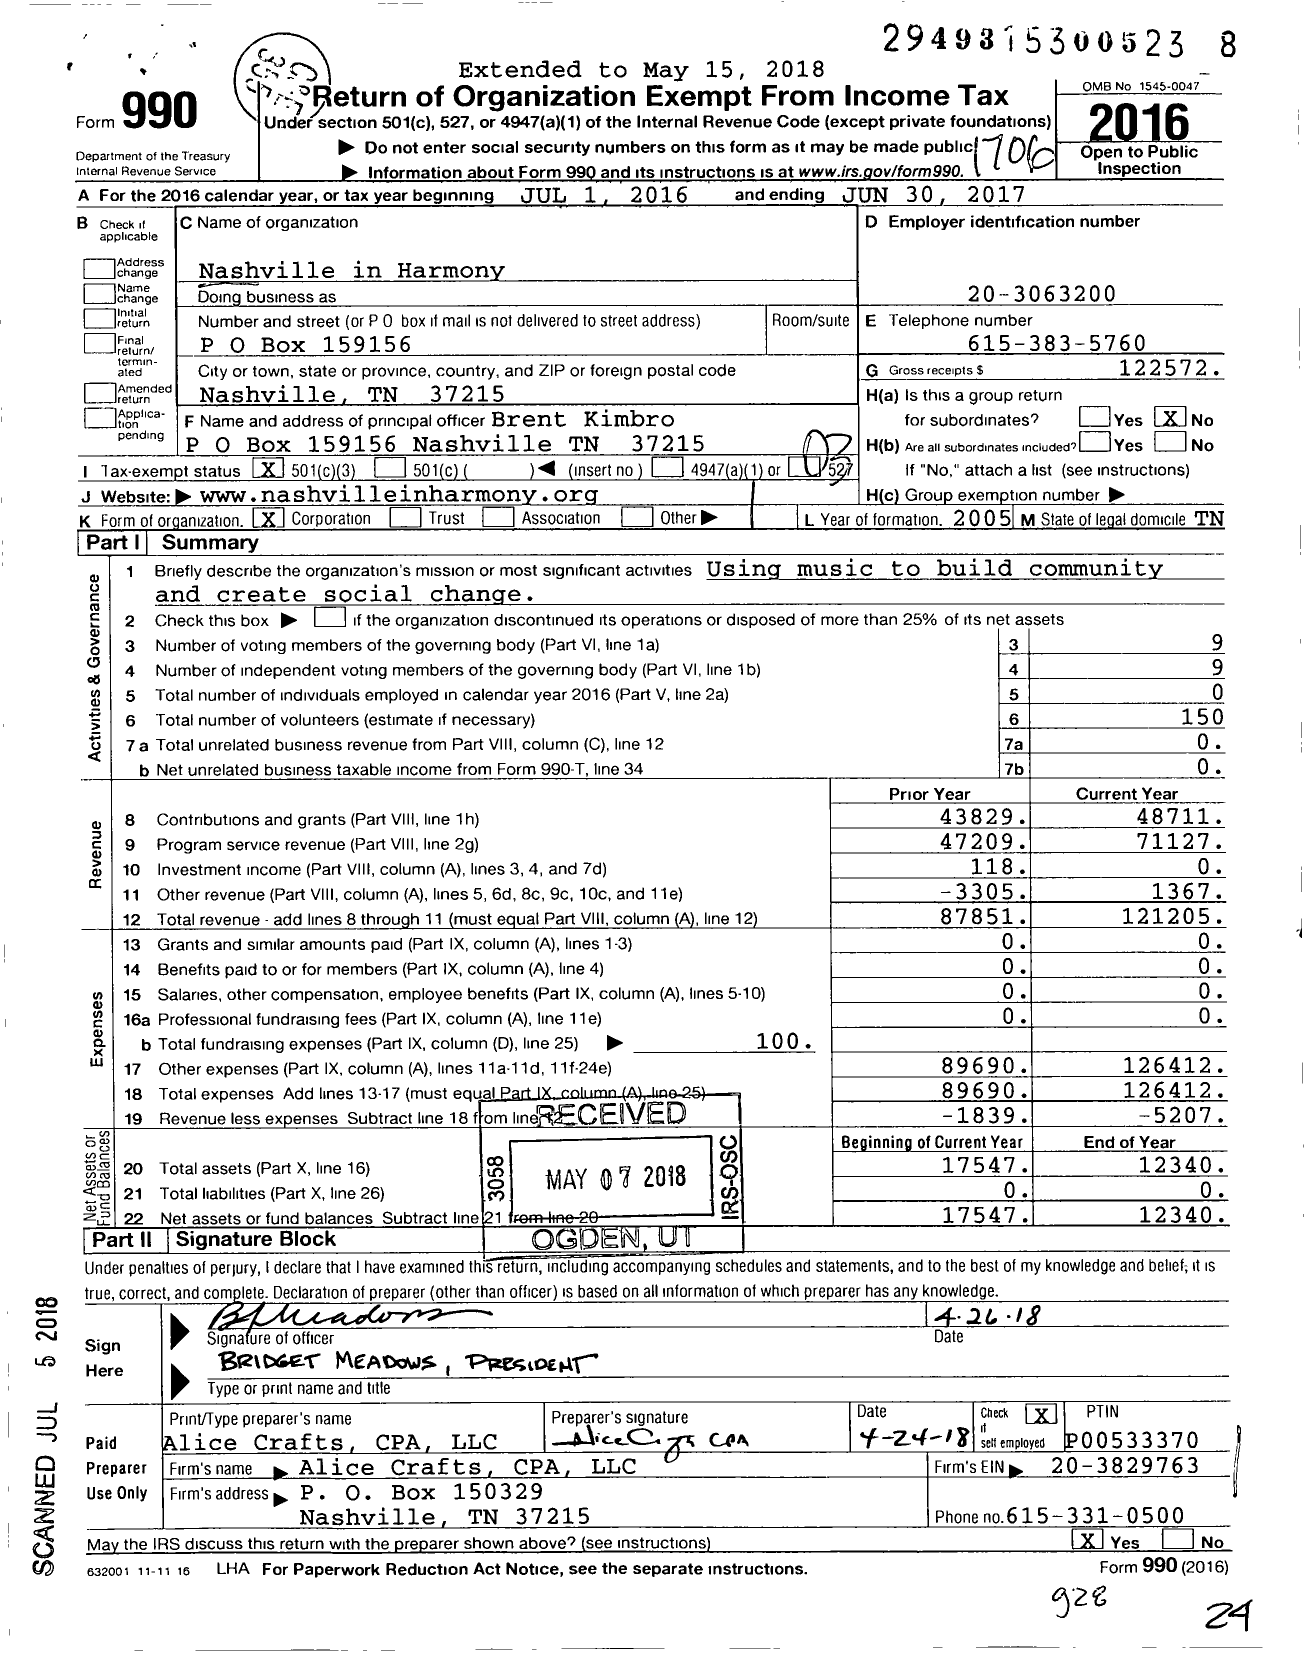 Image of first page of 2016 Form 990 for Nashville in Harmony